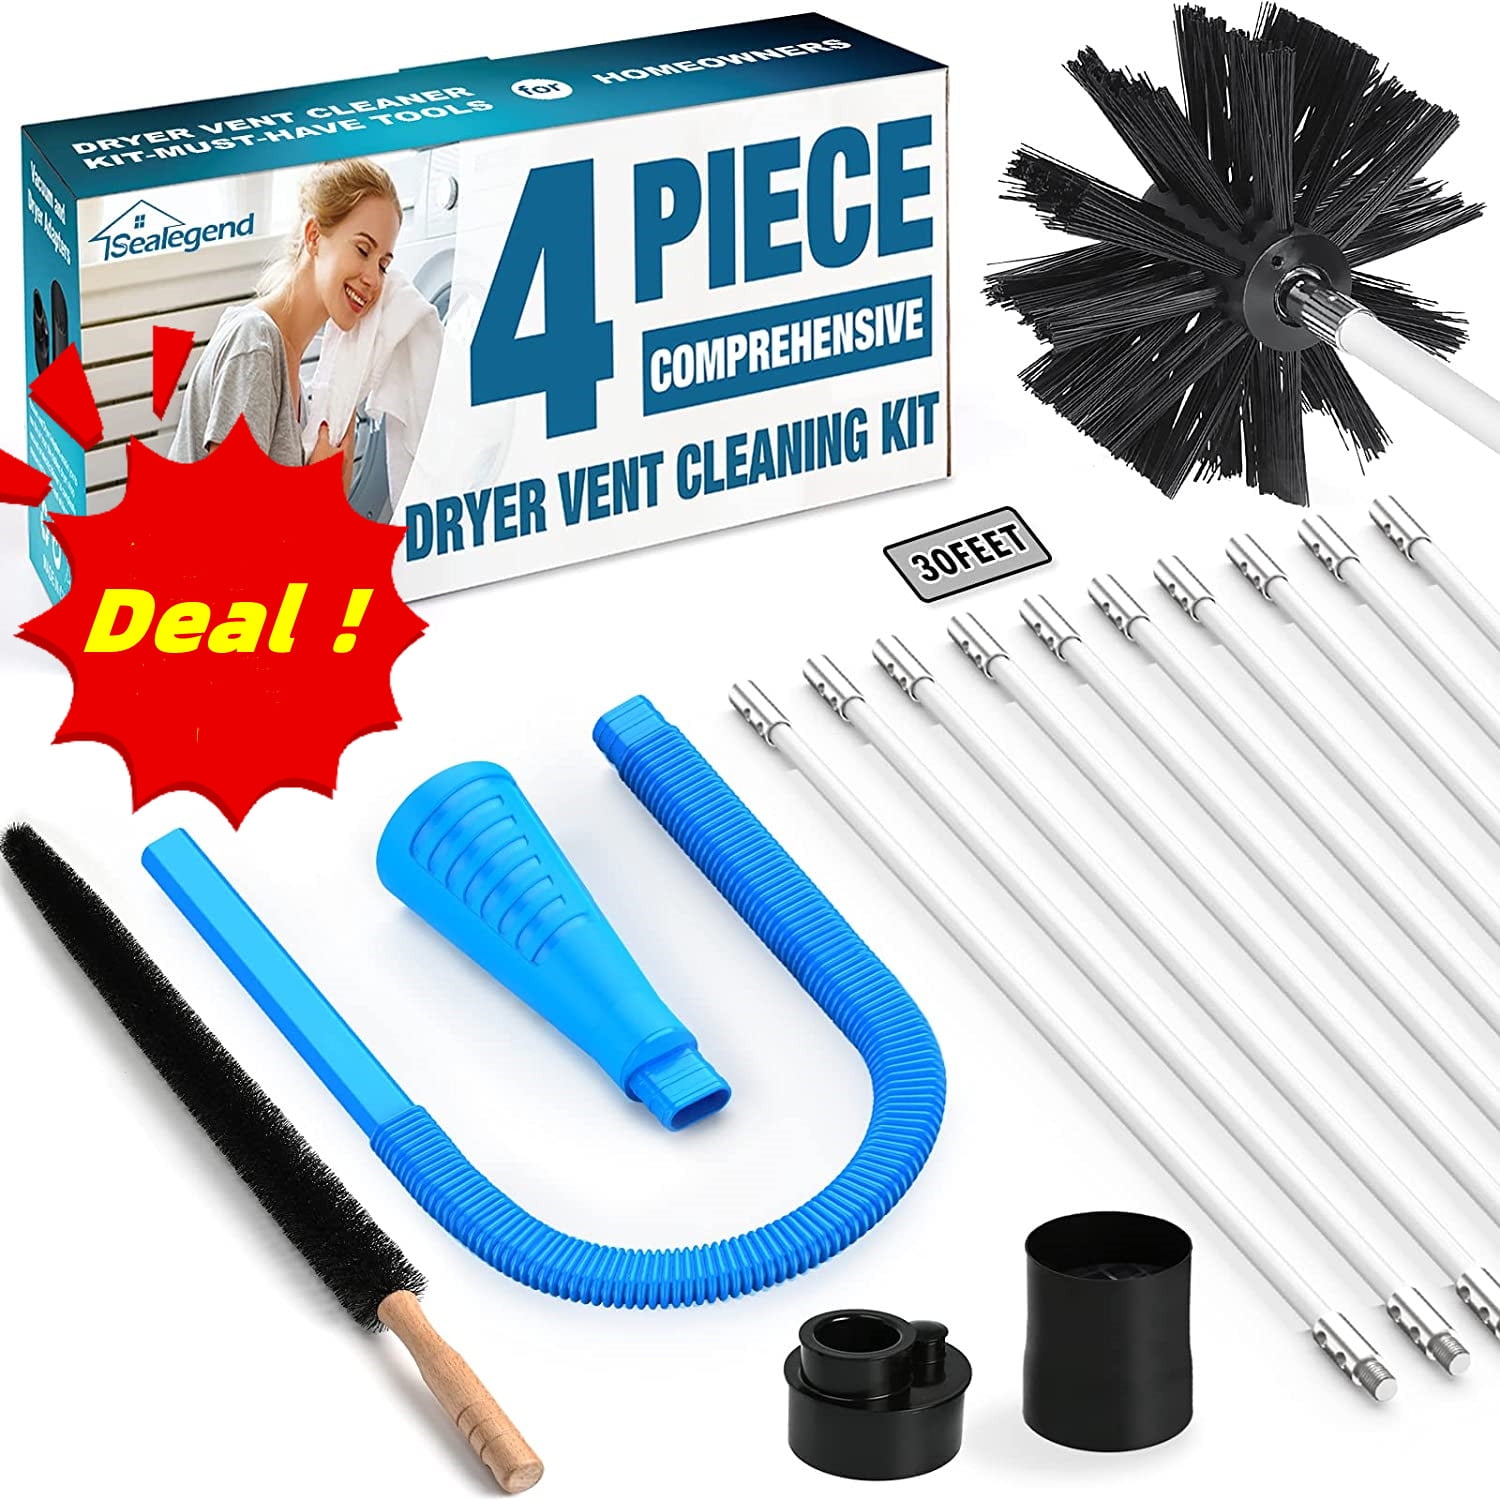 Dryer Vent Cleaning Tools